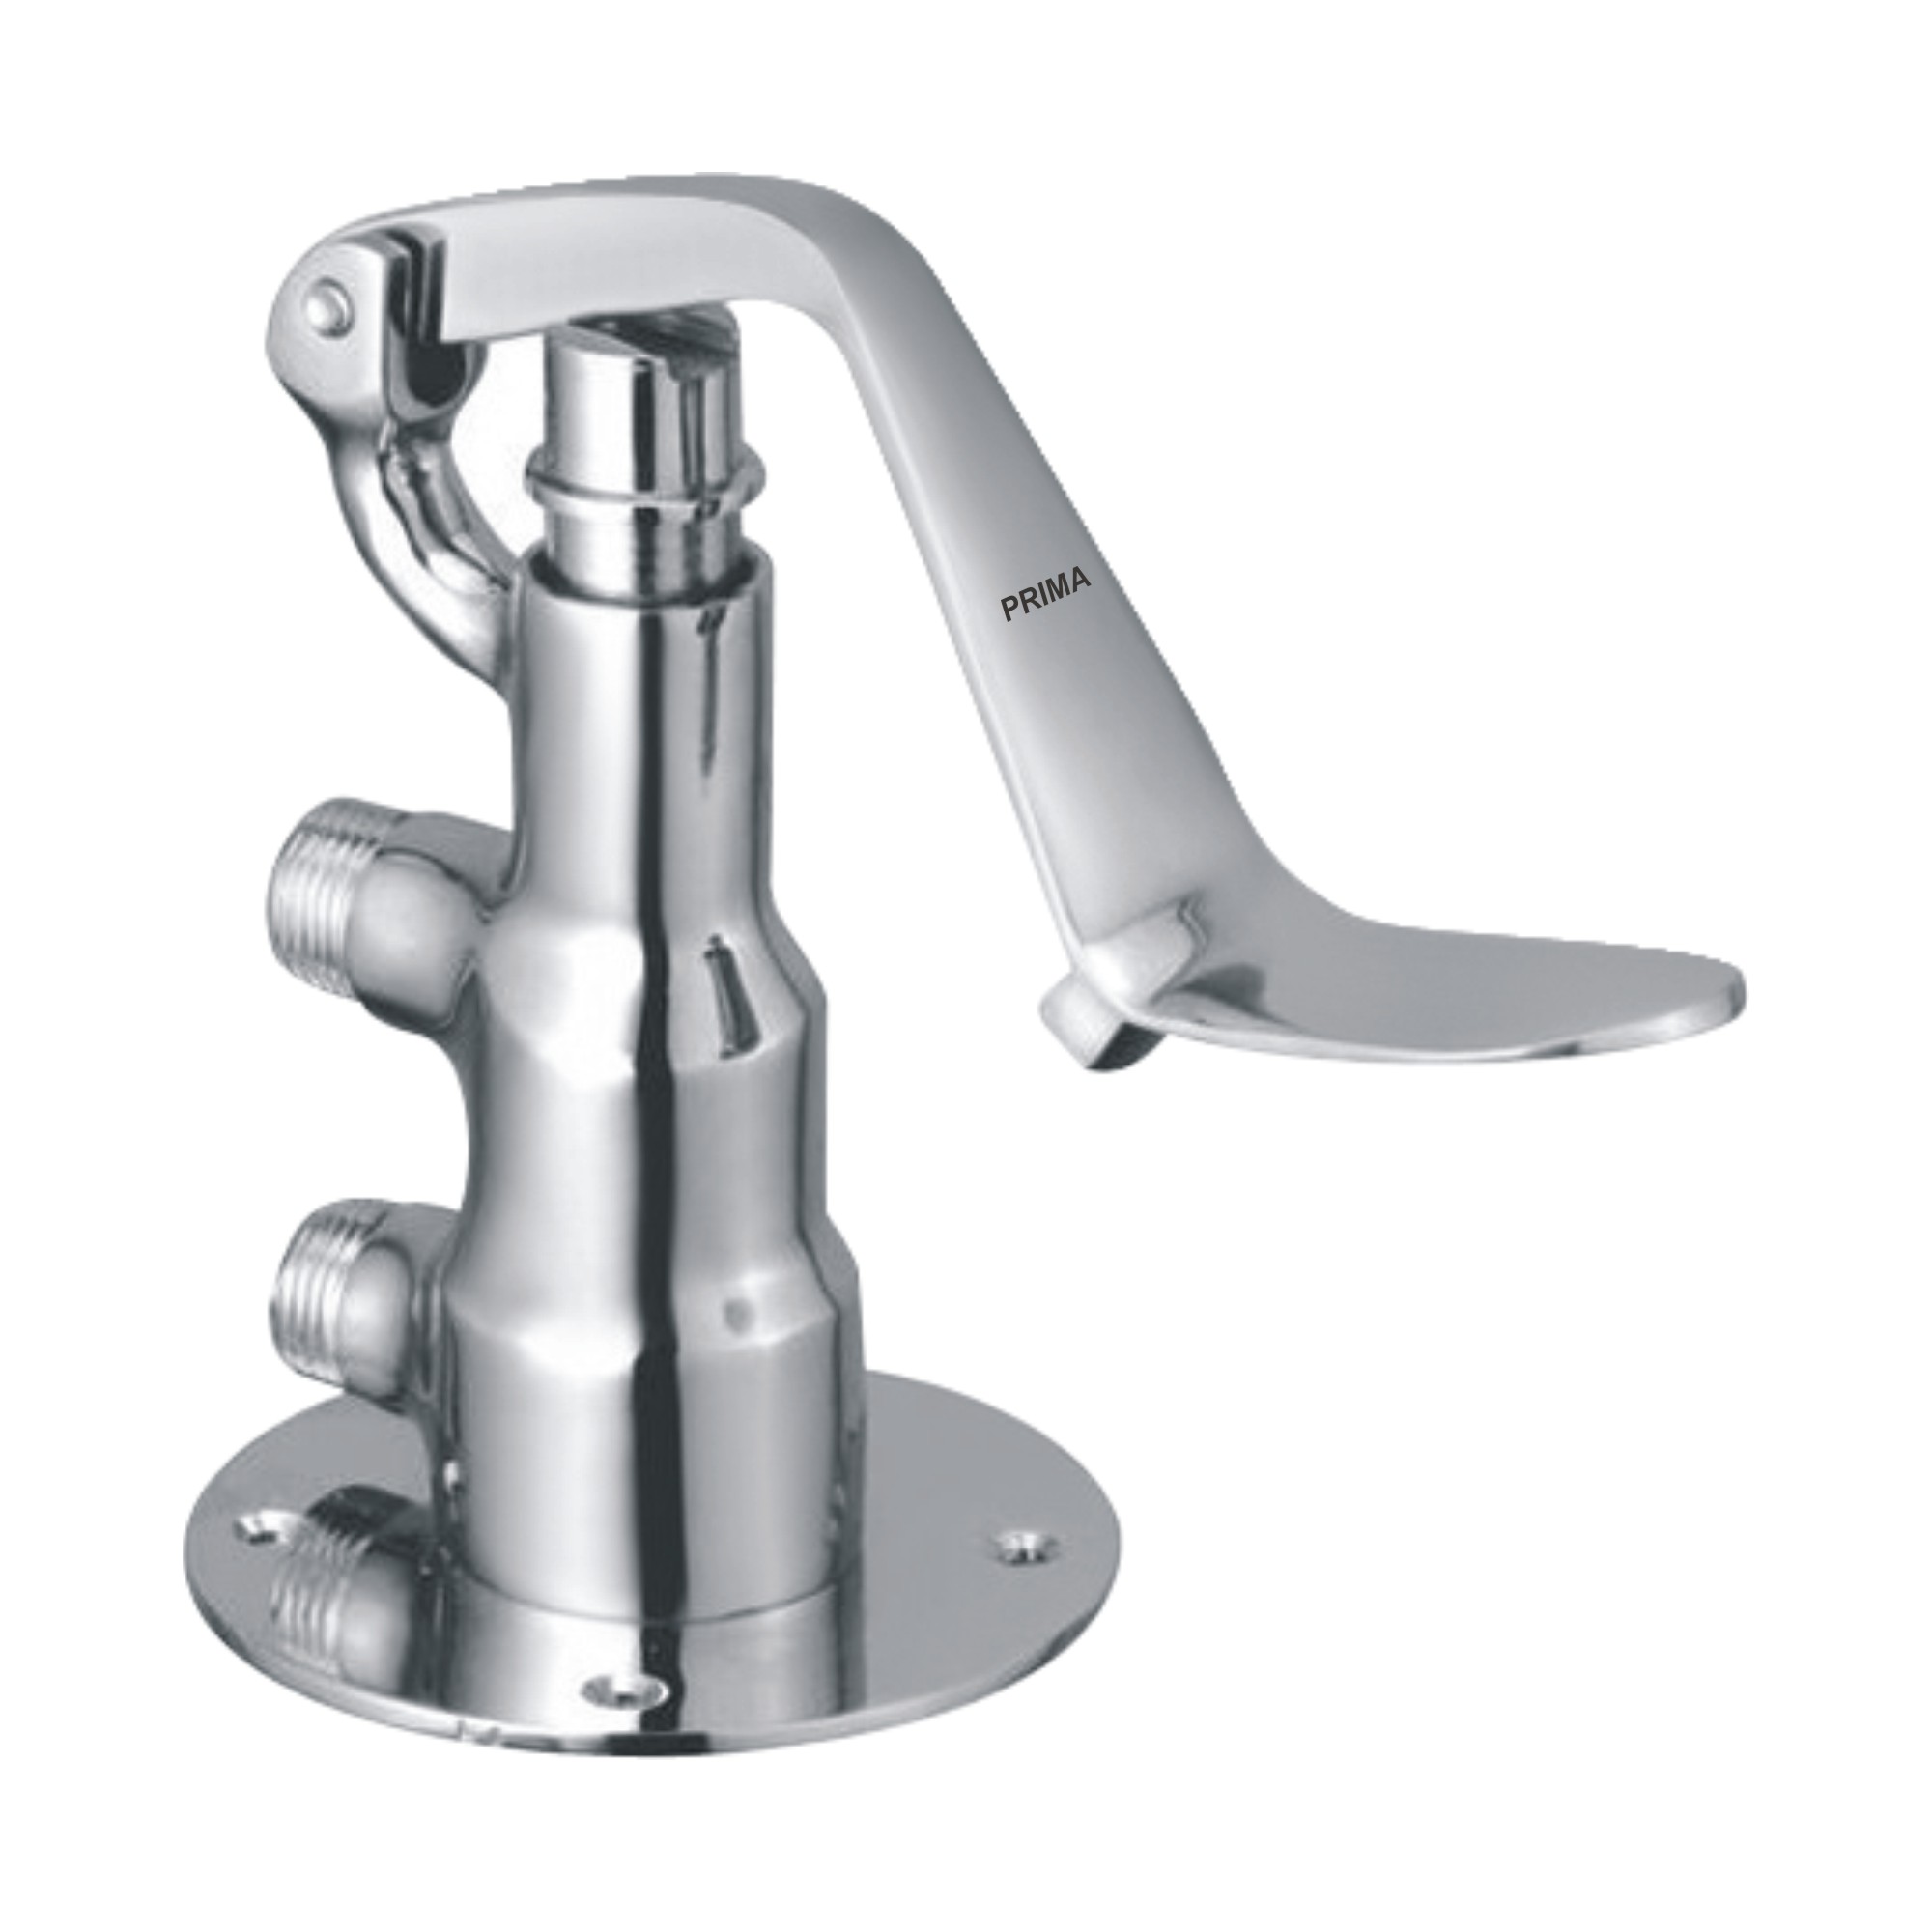 C.P Foot  operated Tap (Press type )